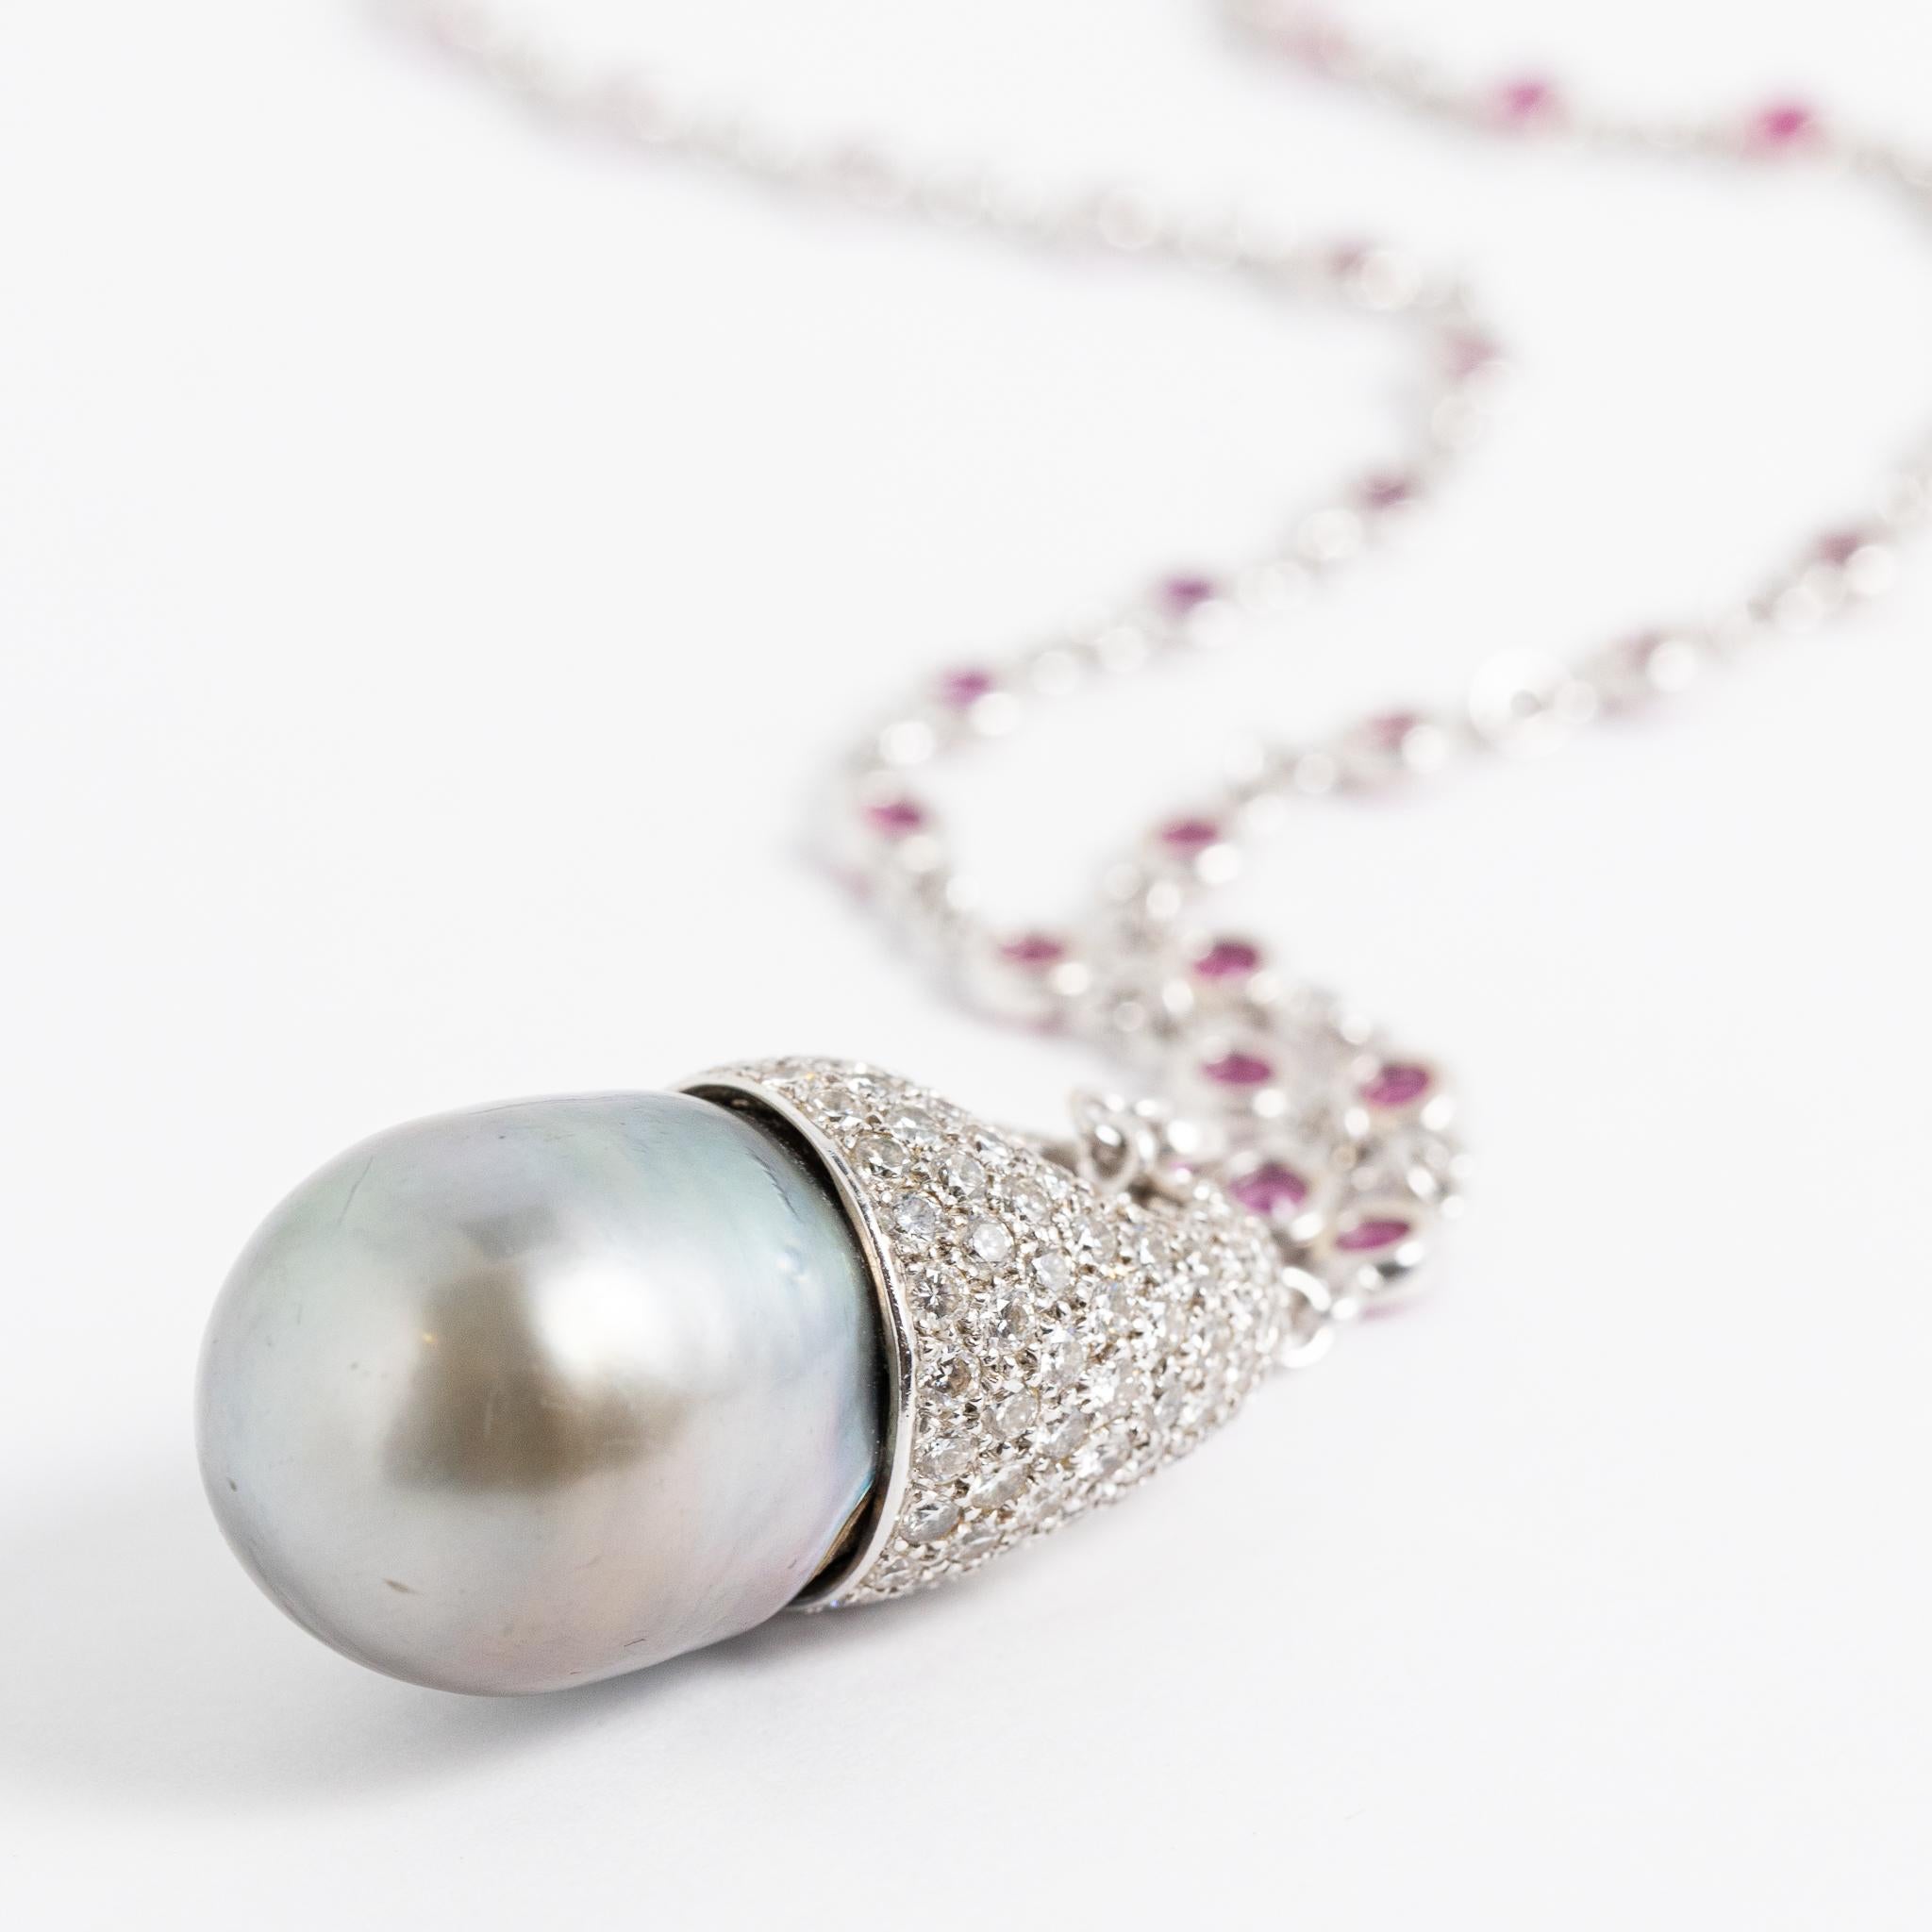 Handcrafted necklace made in Italy of 18 kt. white gold with brilliant-cut diamonds, round-cut rubies and Australian gray pearl.
This piece belongs to Fraleoni's Moon collection.
The necklace features a removable pendant set with diamonds that pick